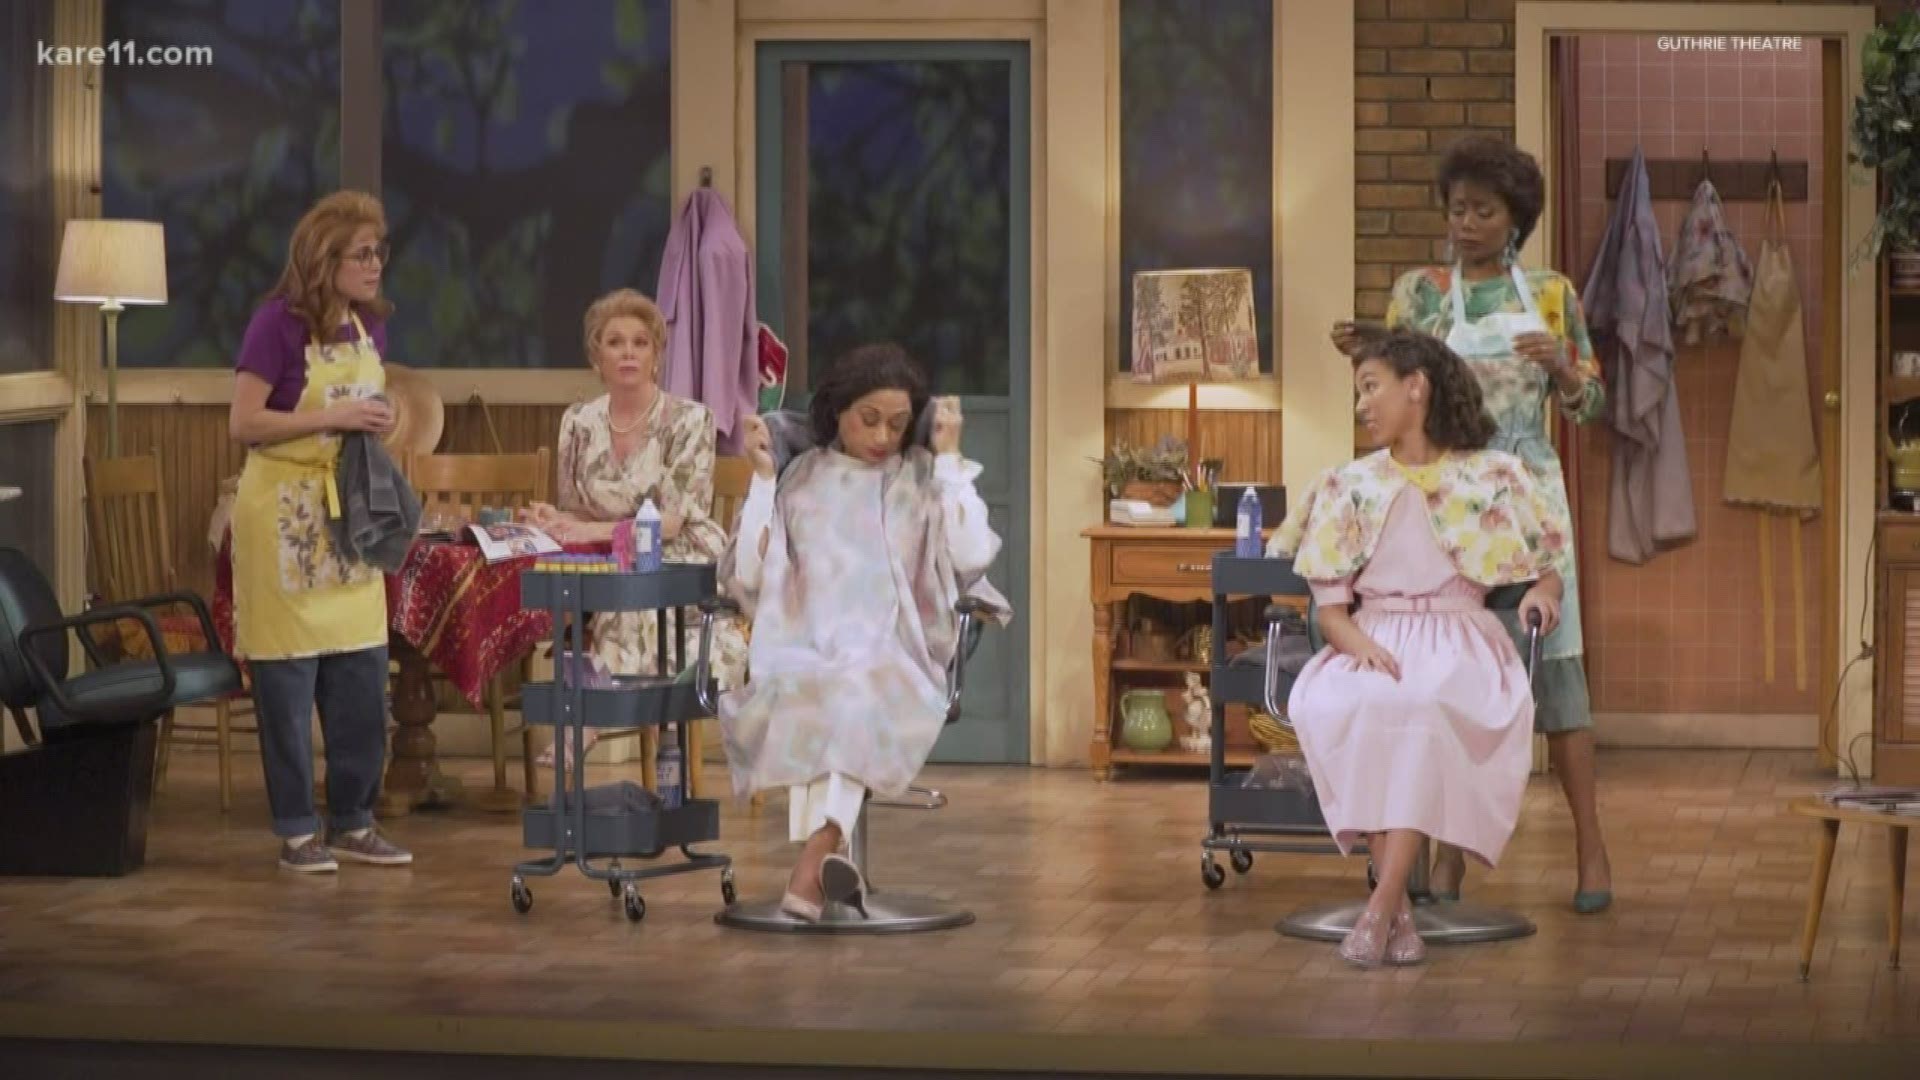 The Guthrie's production of Steel Magnolias is a mixture of 1980s hairstyles, witty banter, Southern hospitality and heartfelt messages.